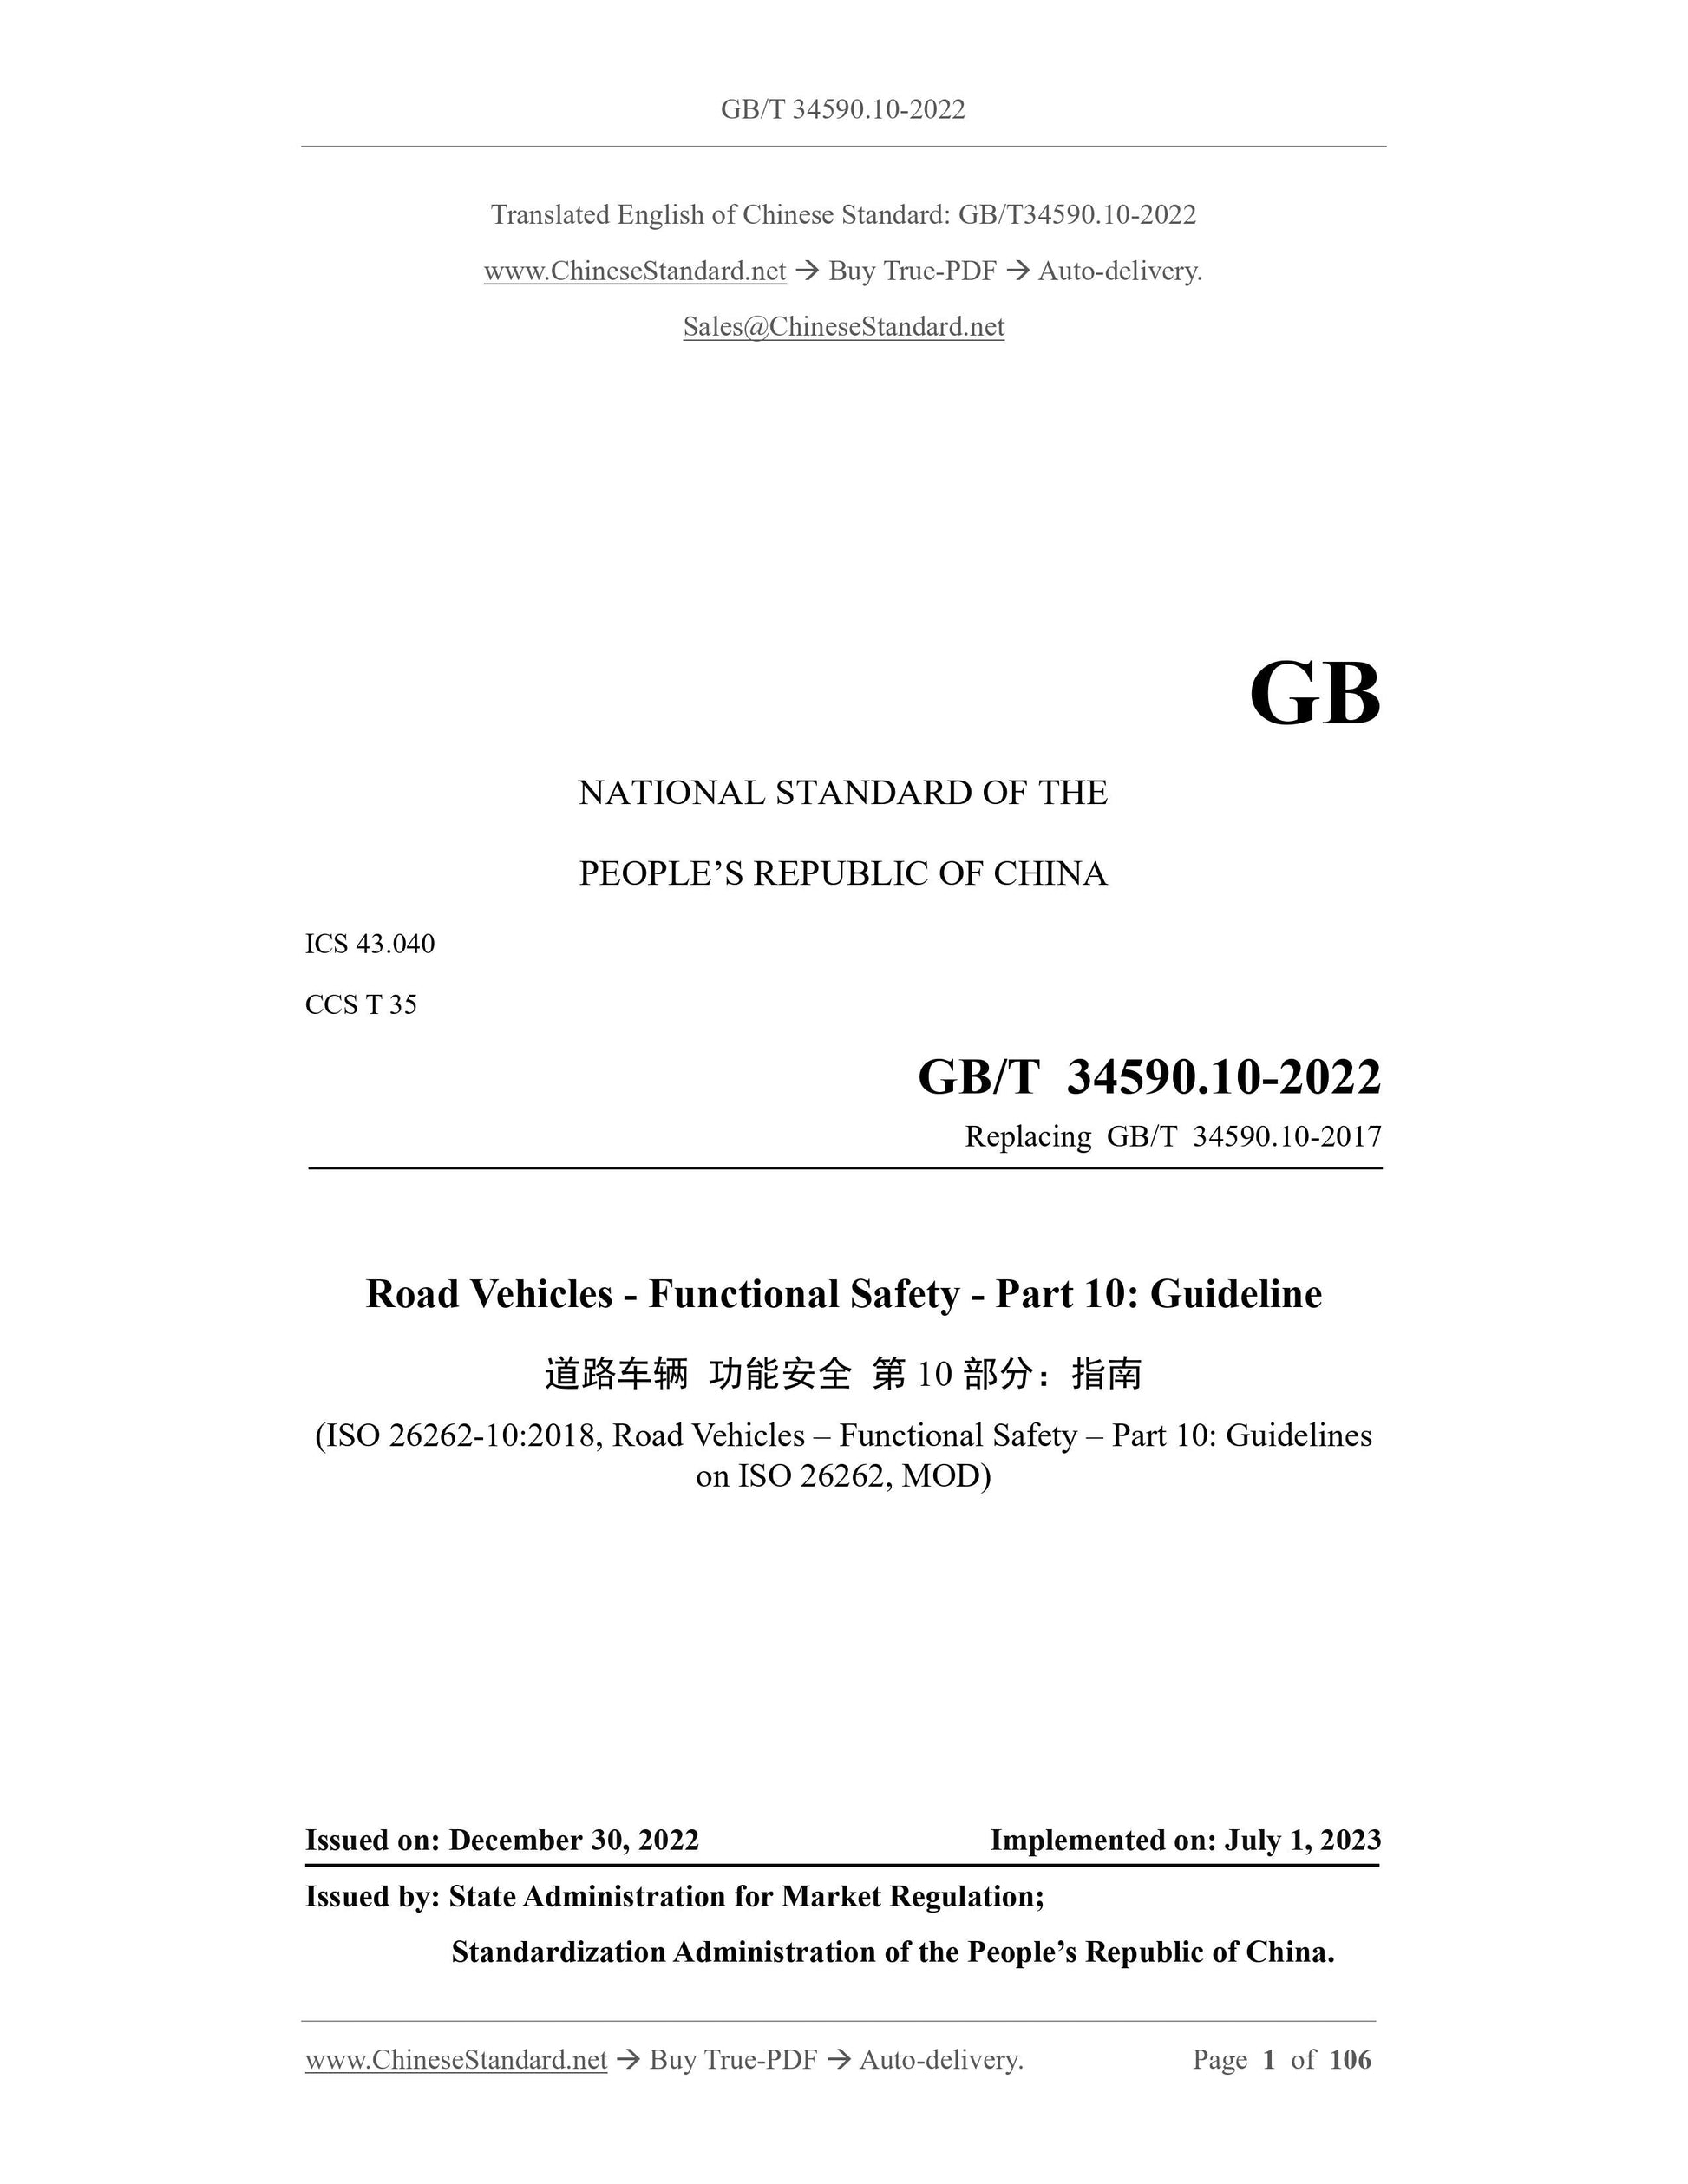 GB/T 34590.10-2022 Page 1